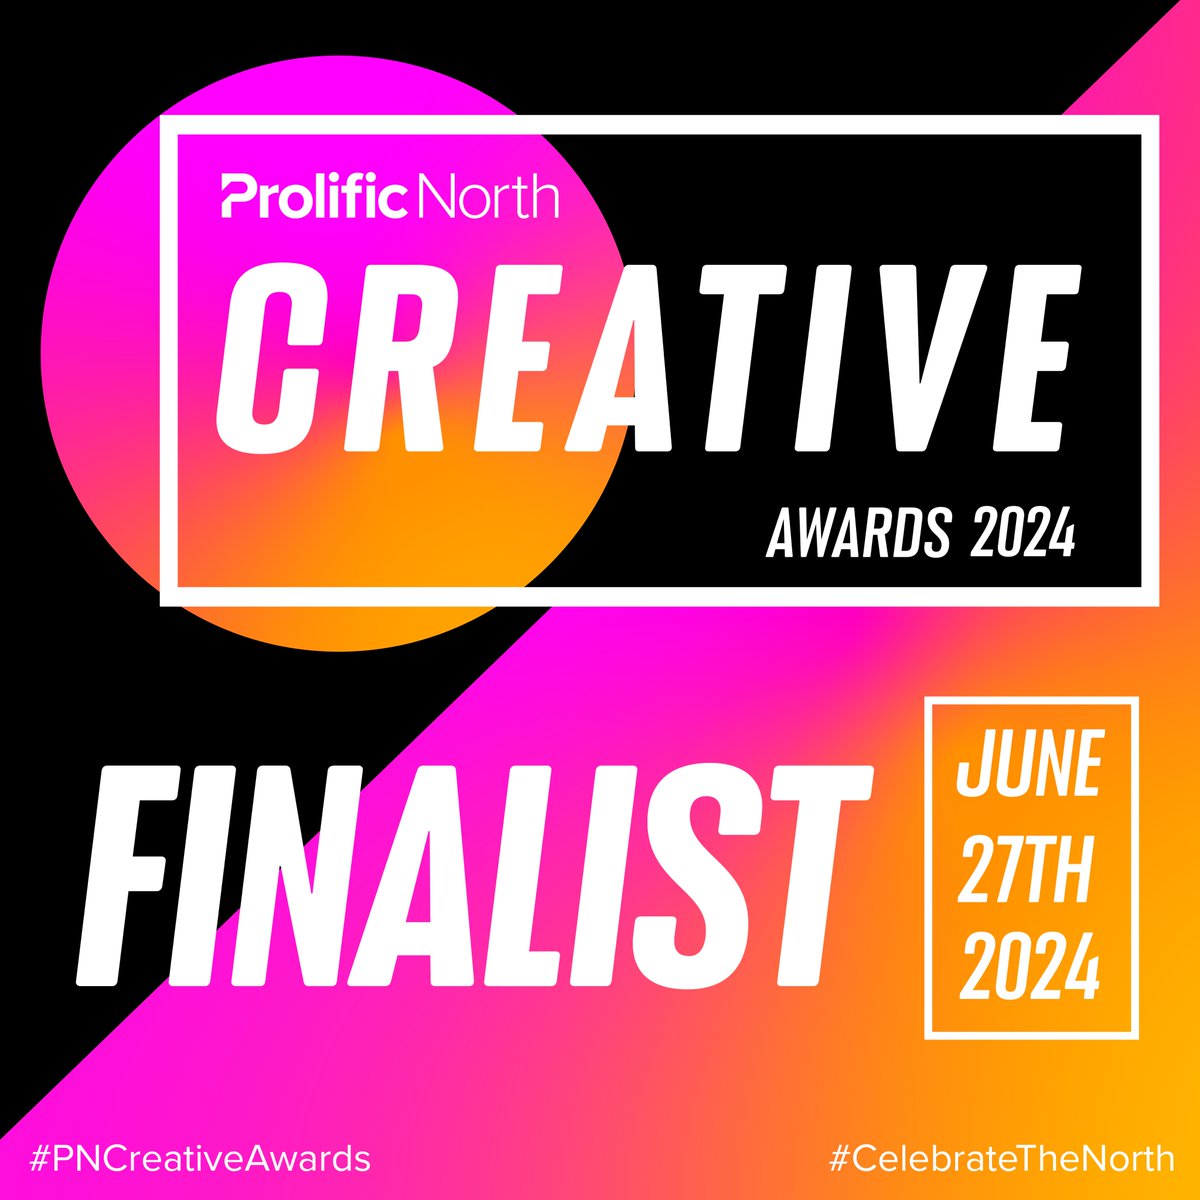 Just shortlisted for the @ProlificNorth Creative Awards! We’re dead proud of our team for the magic they created for @Astonishcleaner's latest campaign, and hats off to Fetch Films for the production. Fingers crossed for 27th June🤞 #BuildingUnfogettableBrands